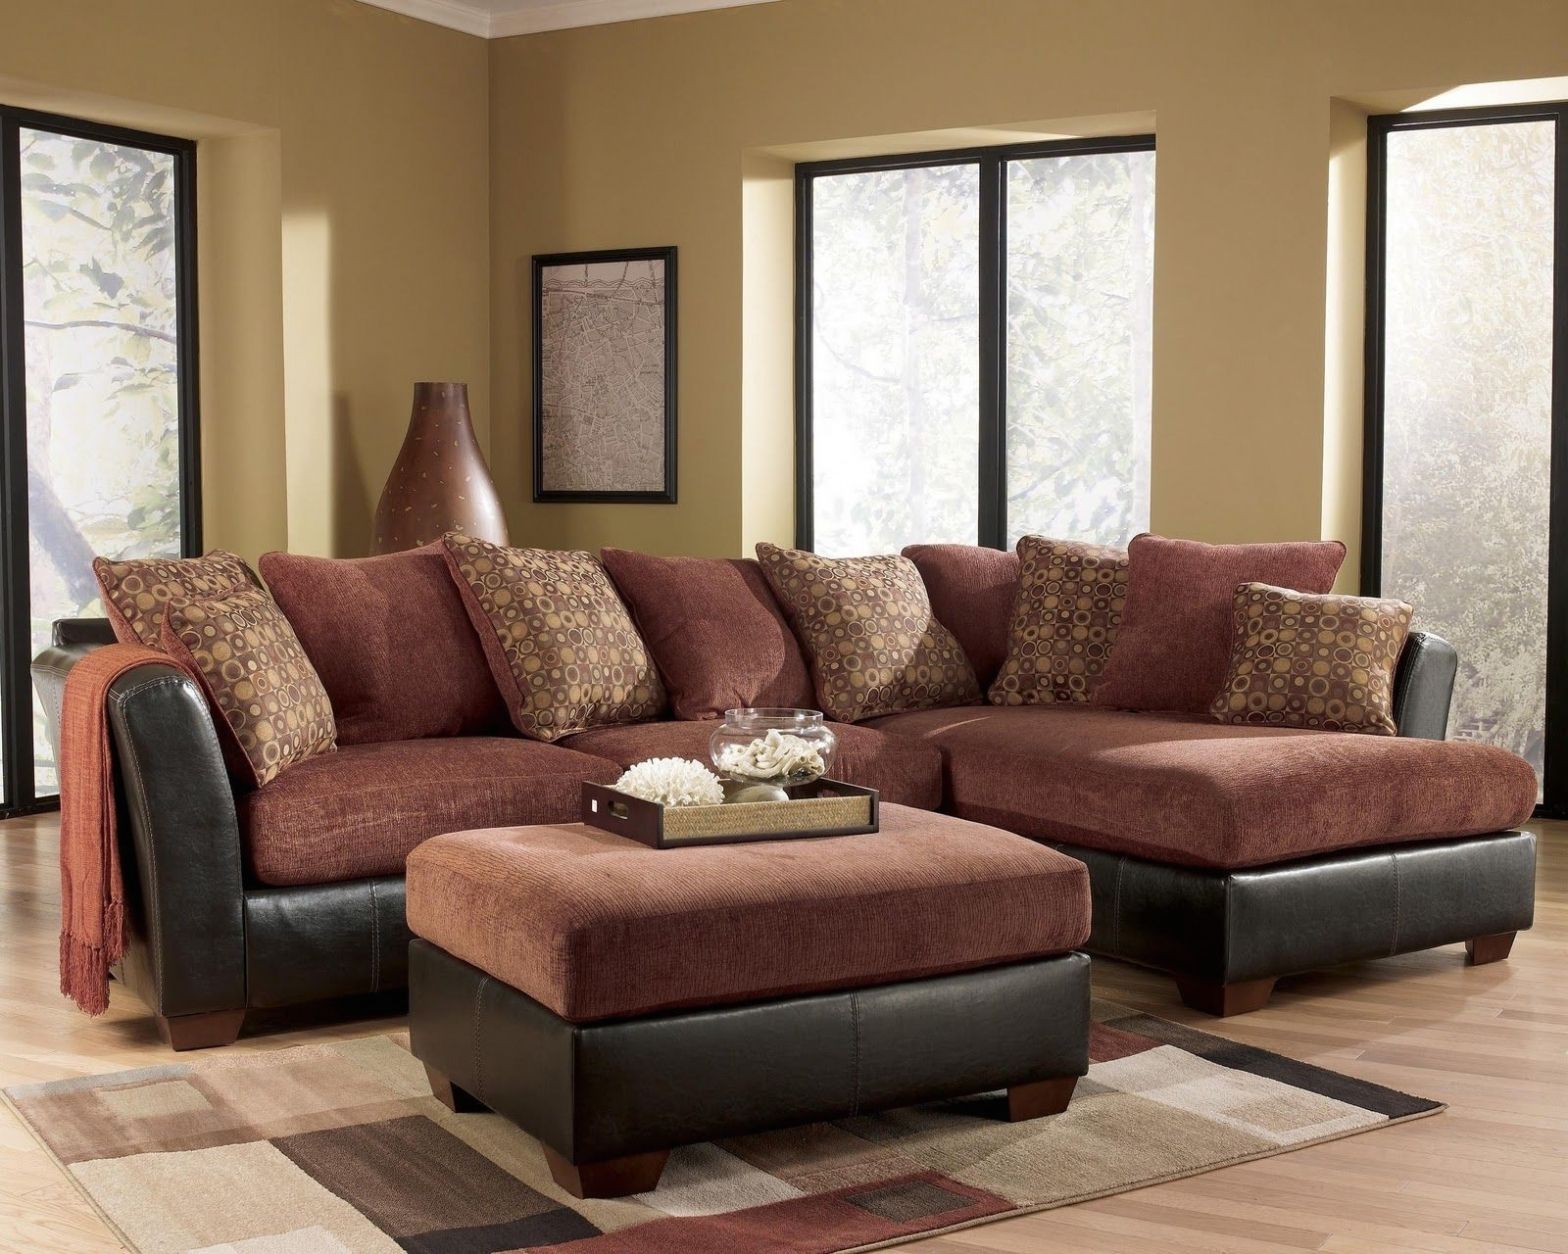 2017 Jcpenney Sectional Sofas For Sofa: Furniture : Amazing Jc Penneys Furniture Beautiful Jcpenney (View 9 of 15)